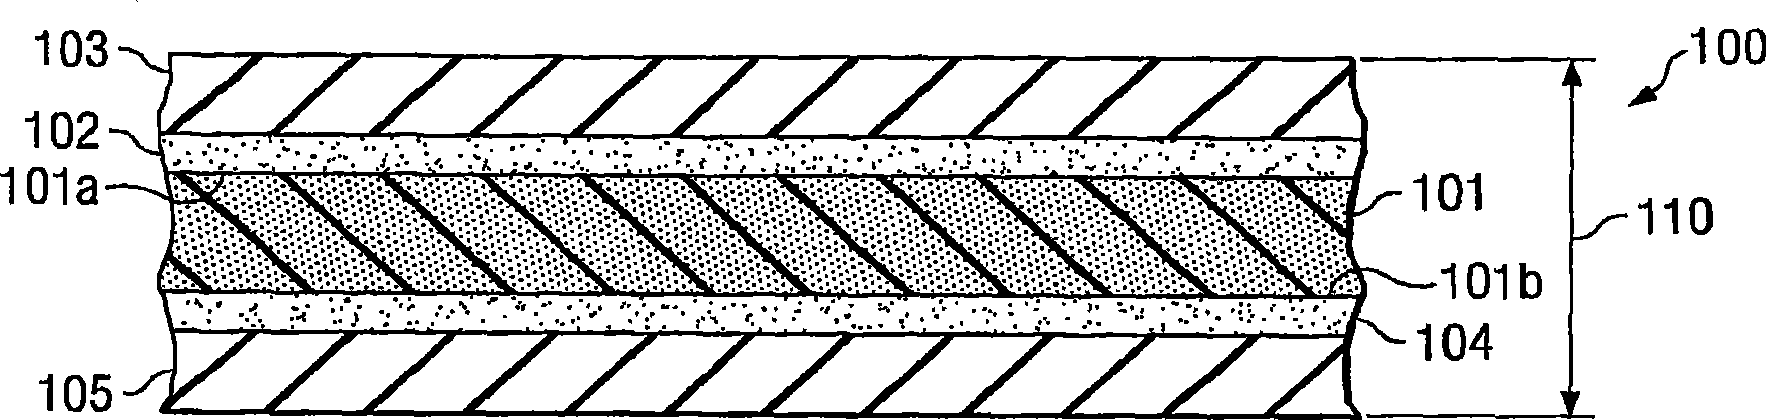 Flip-attached and underfilled stacked semiconductor devices